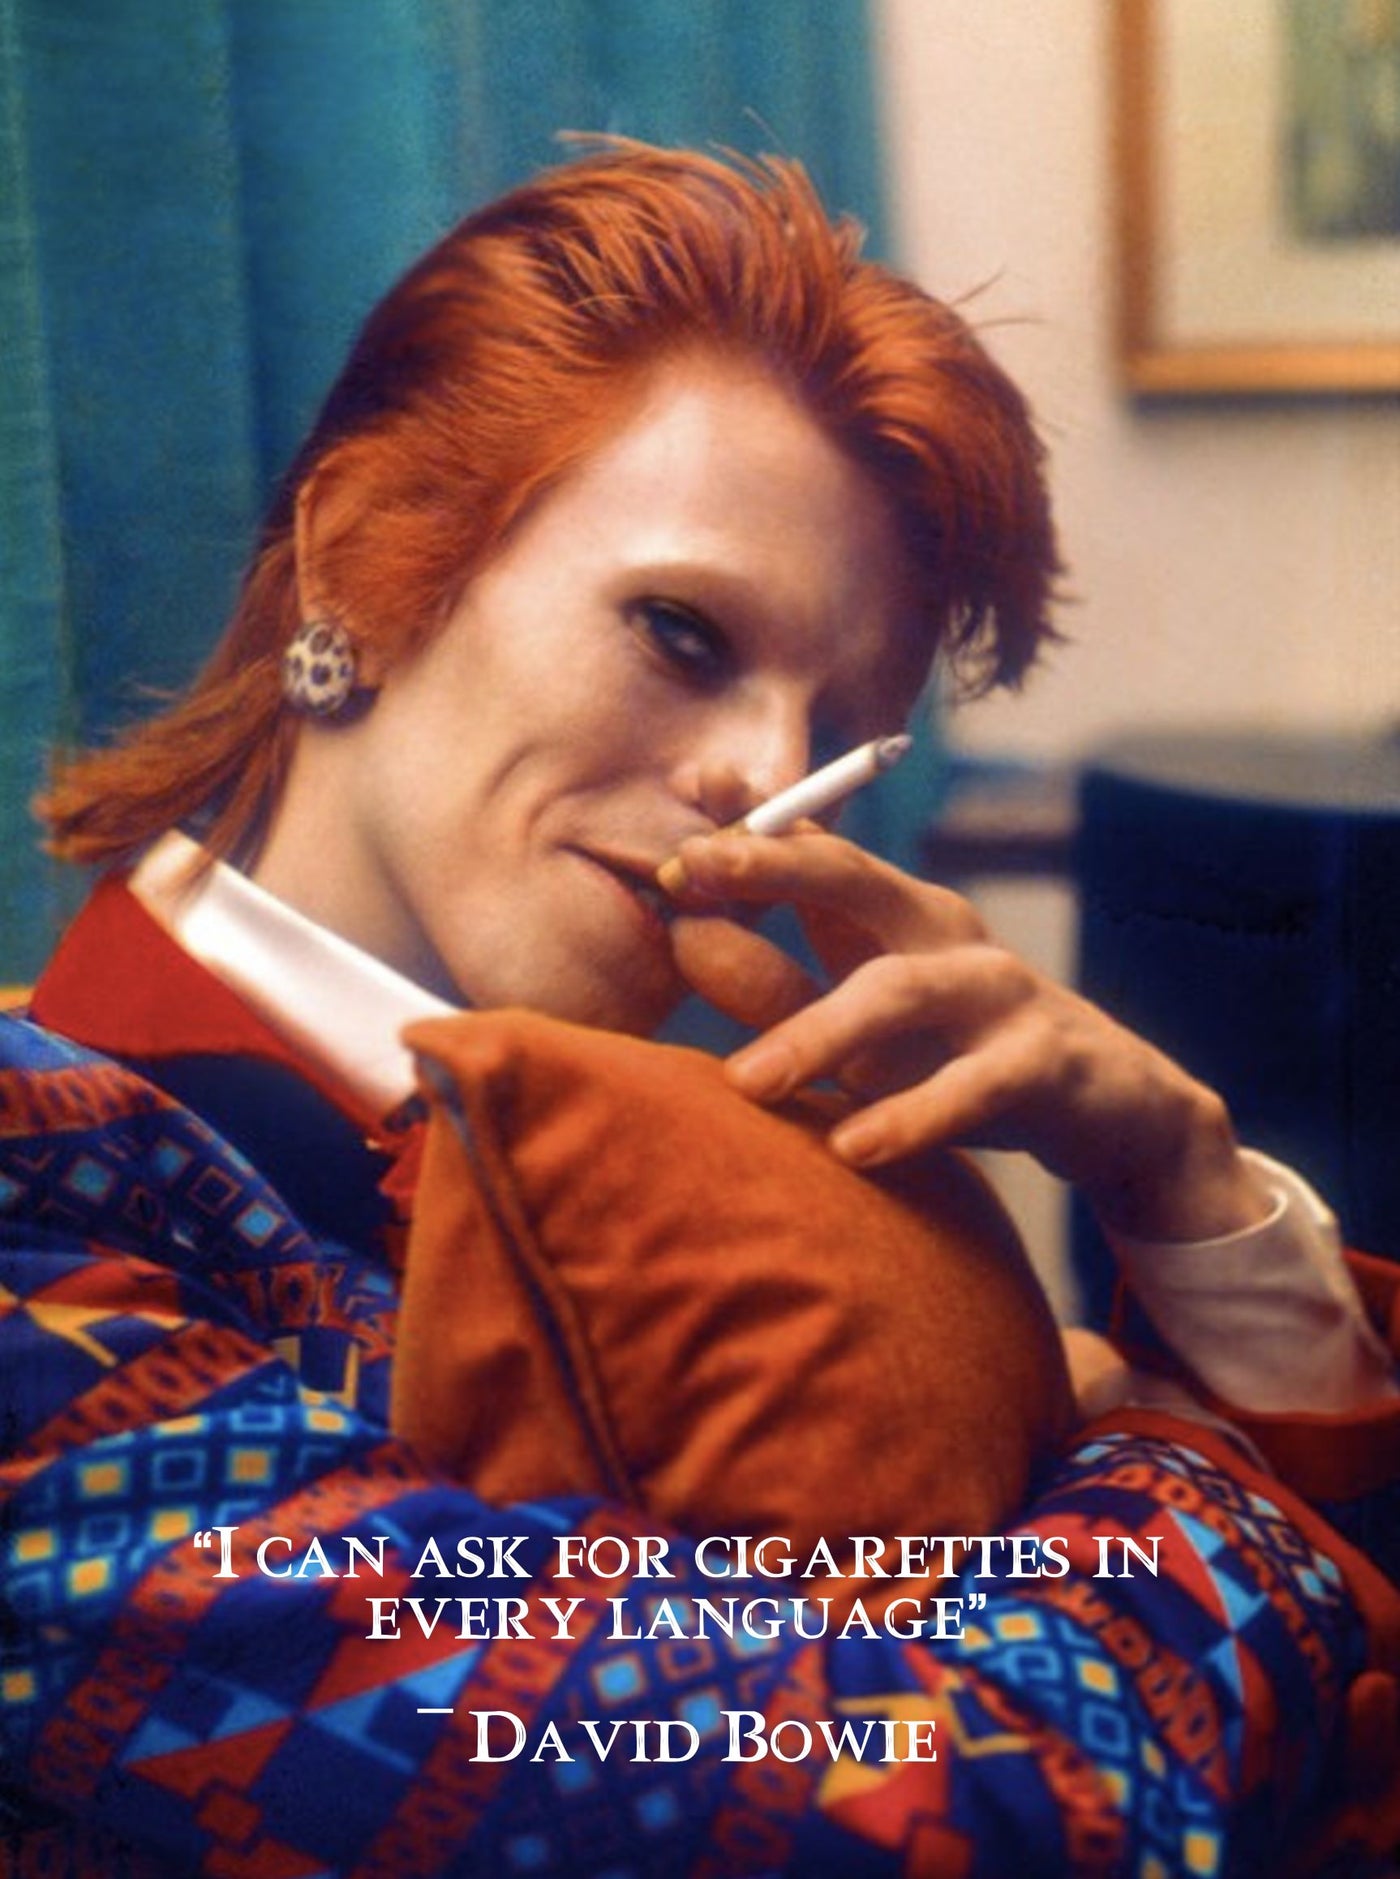 BOWIE QUOTES "I can ask for cigarettes in every language"